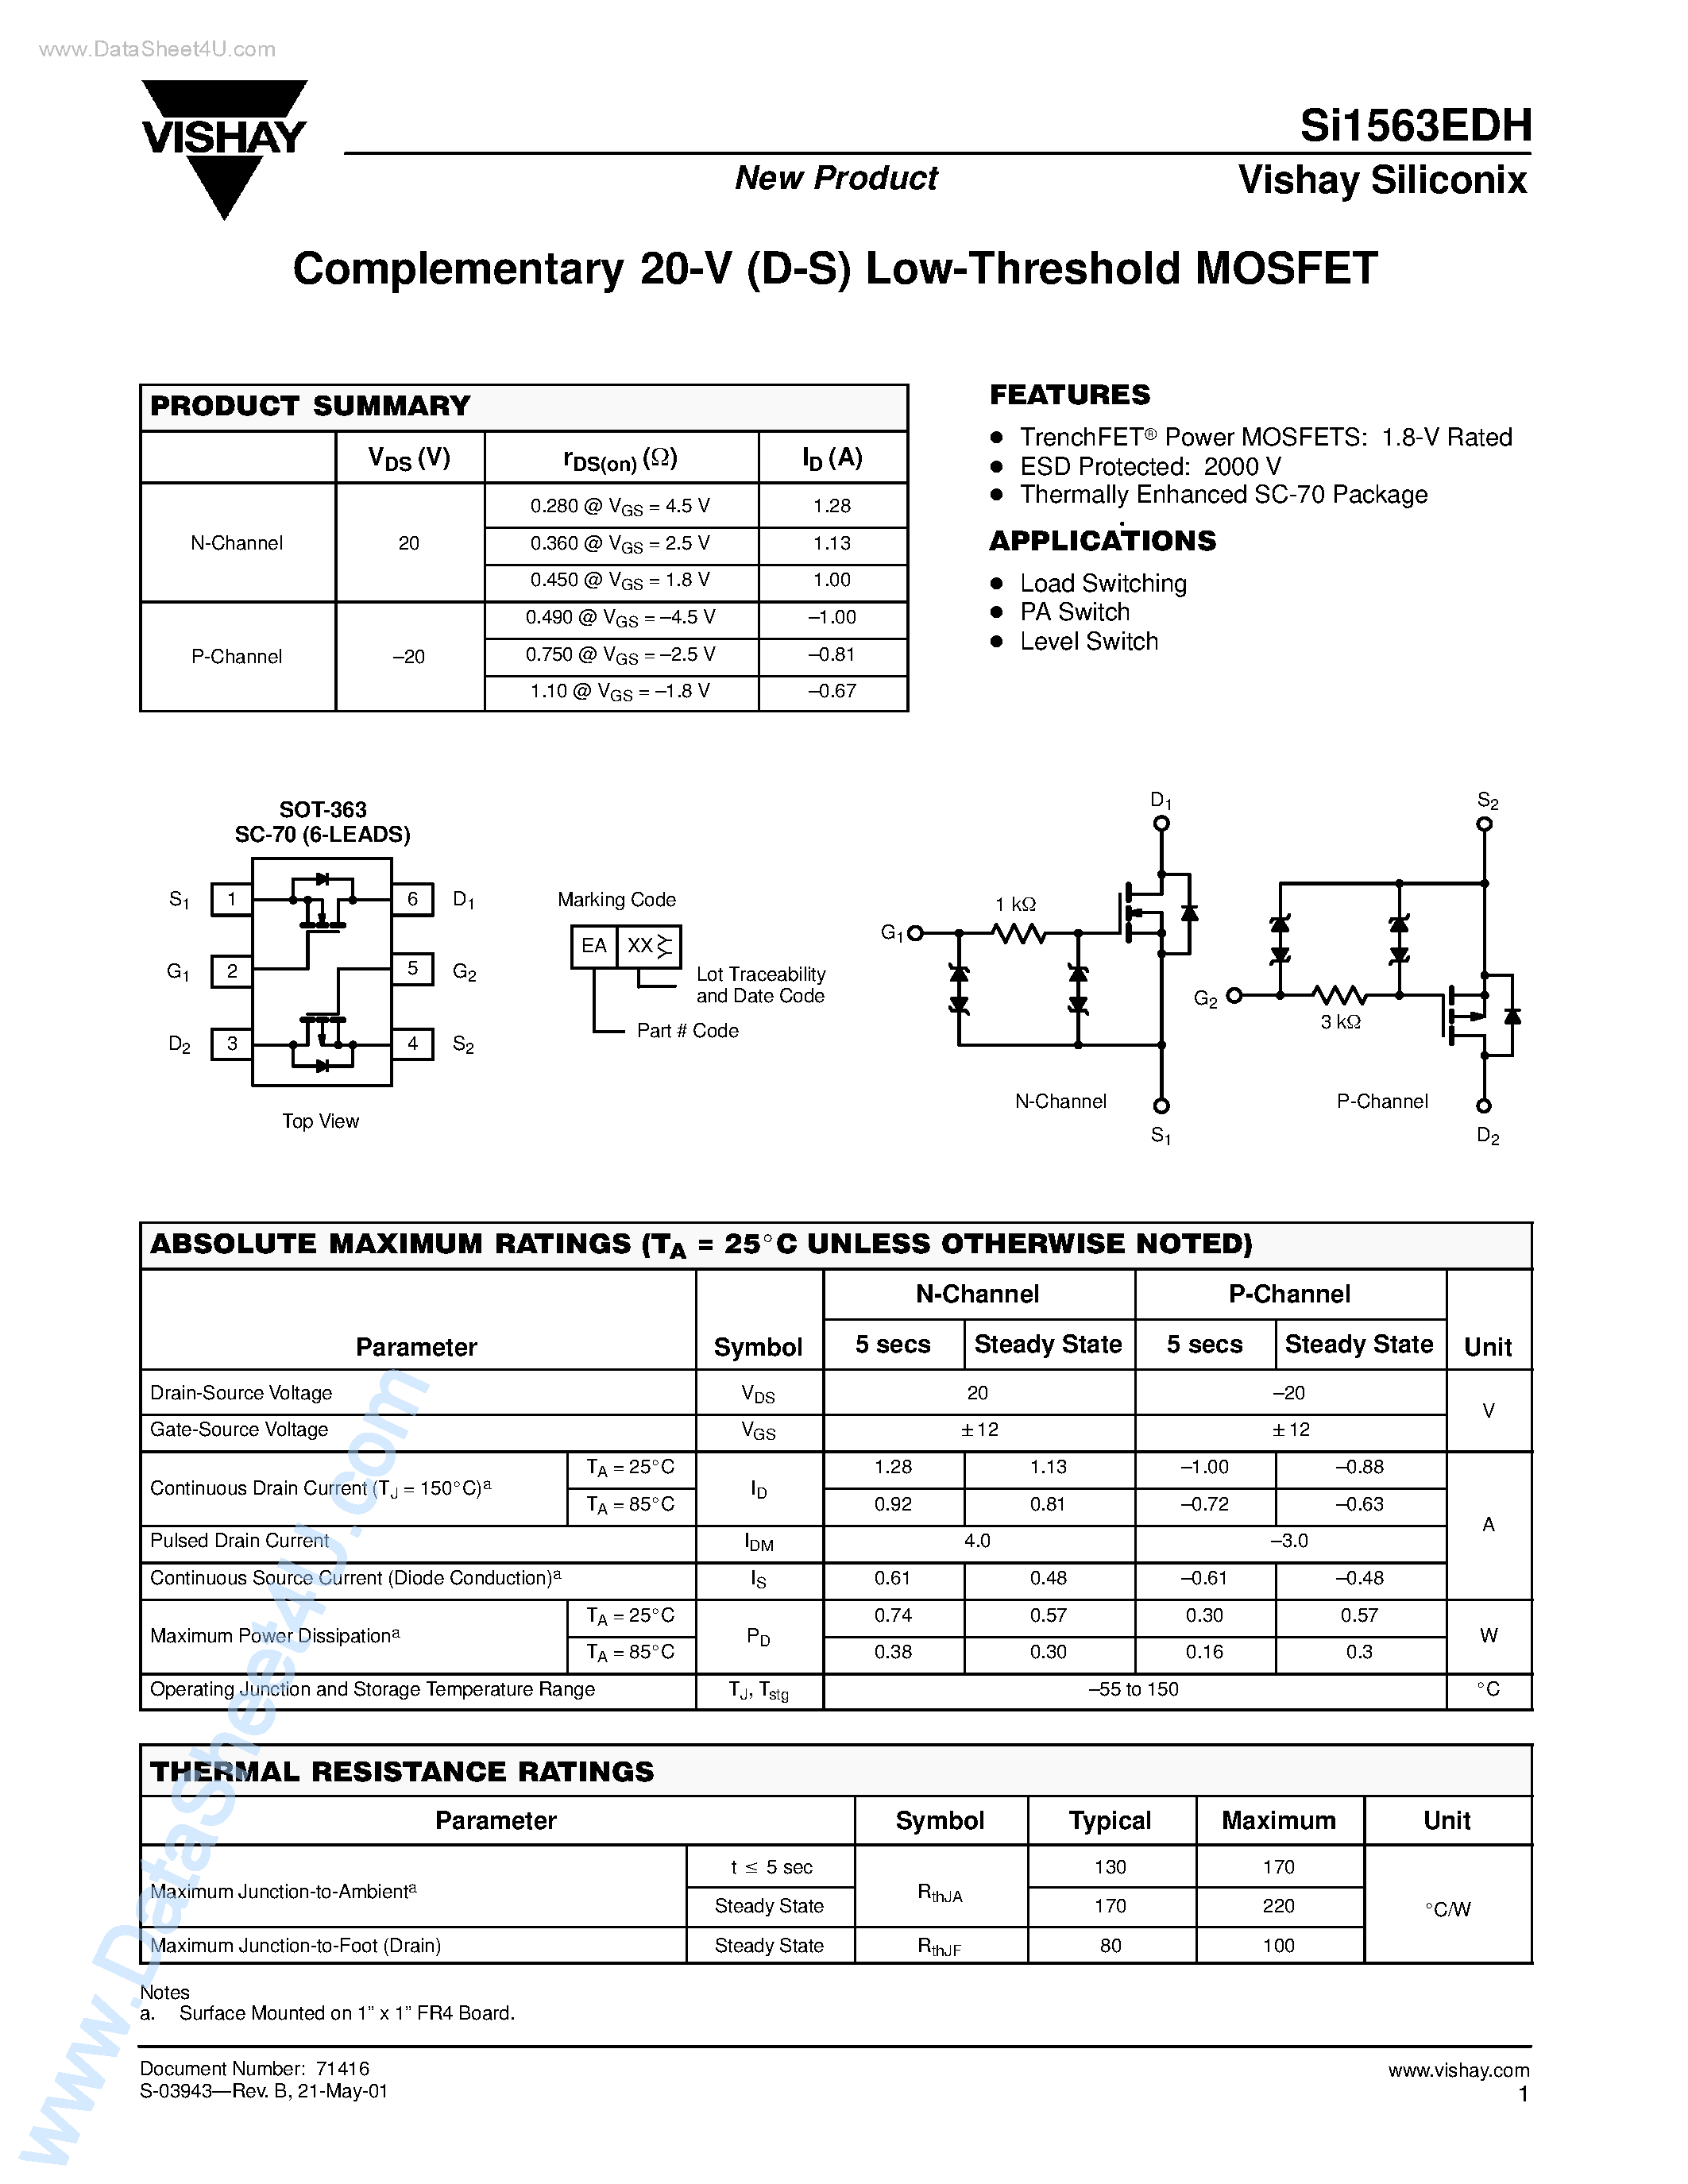 Datasheet SI1563EDH - Complementary 20-V (D-S) Low-Threshold MOSFET page 1